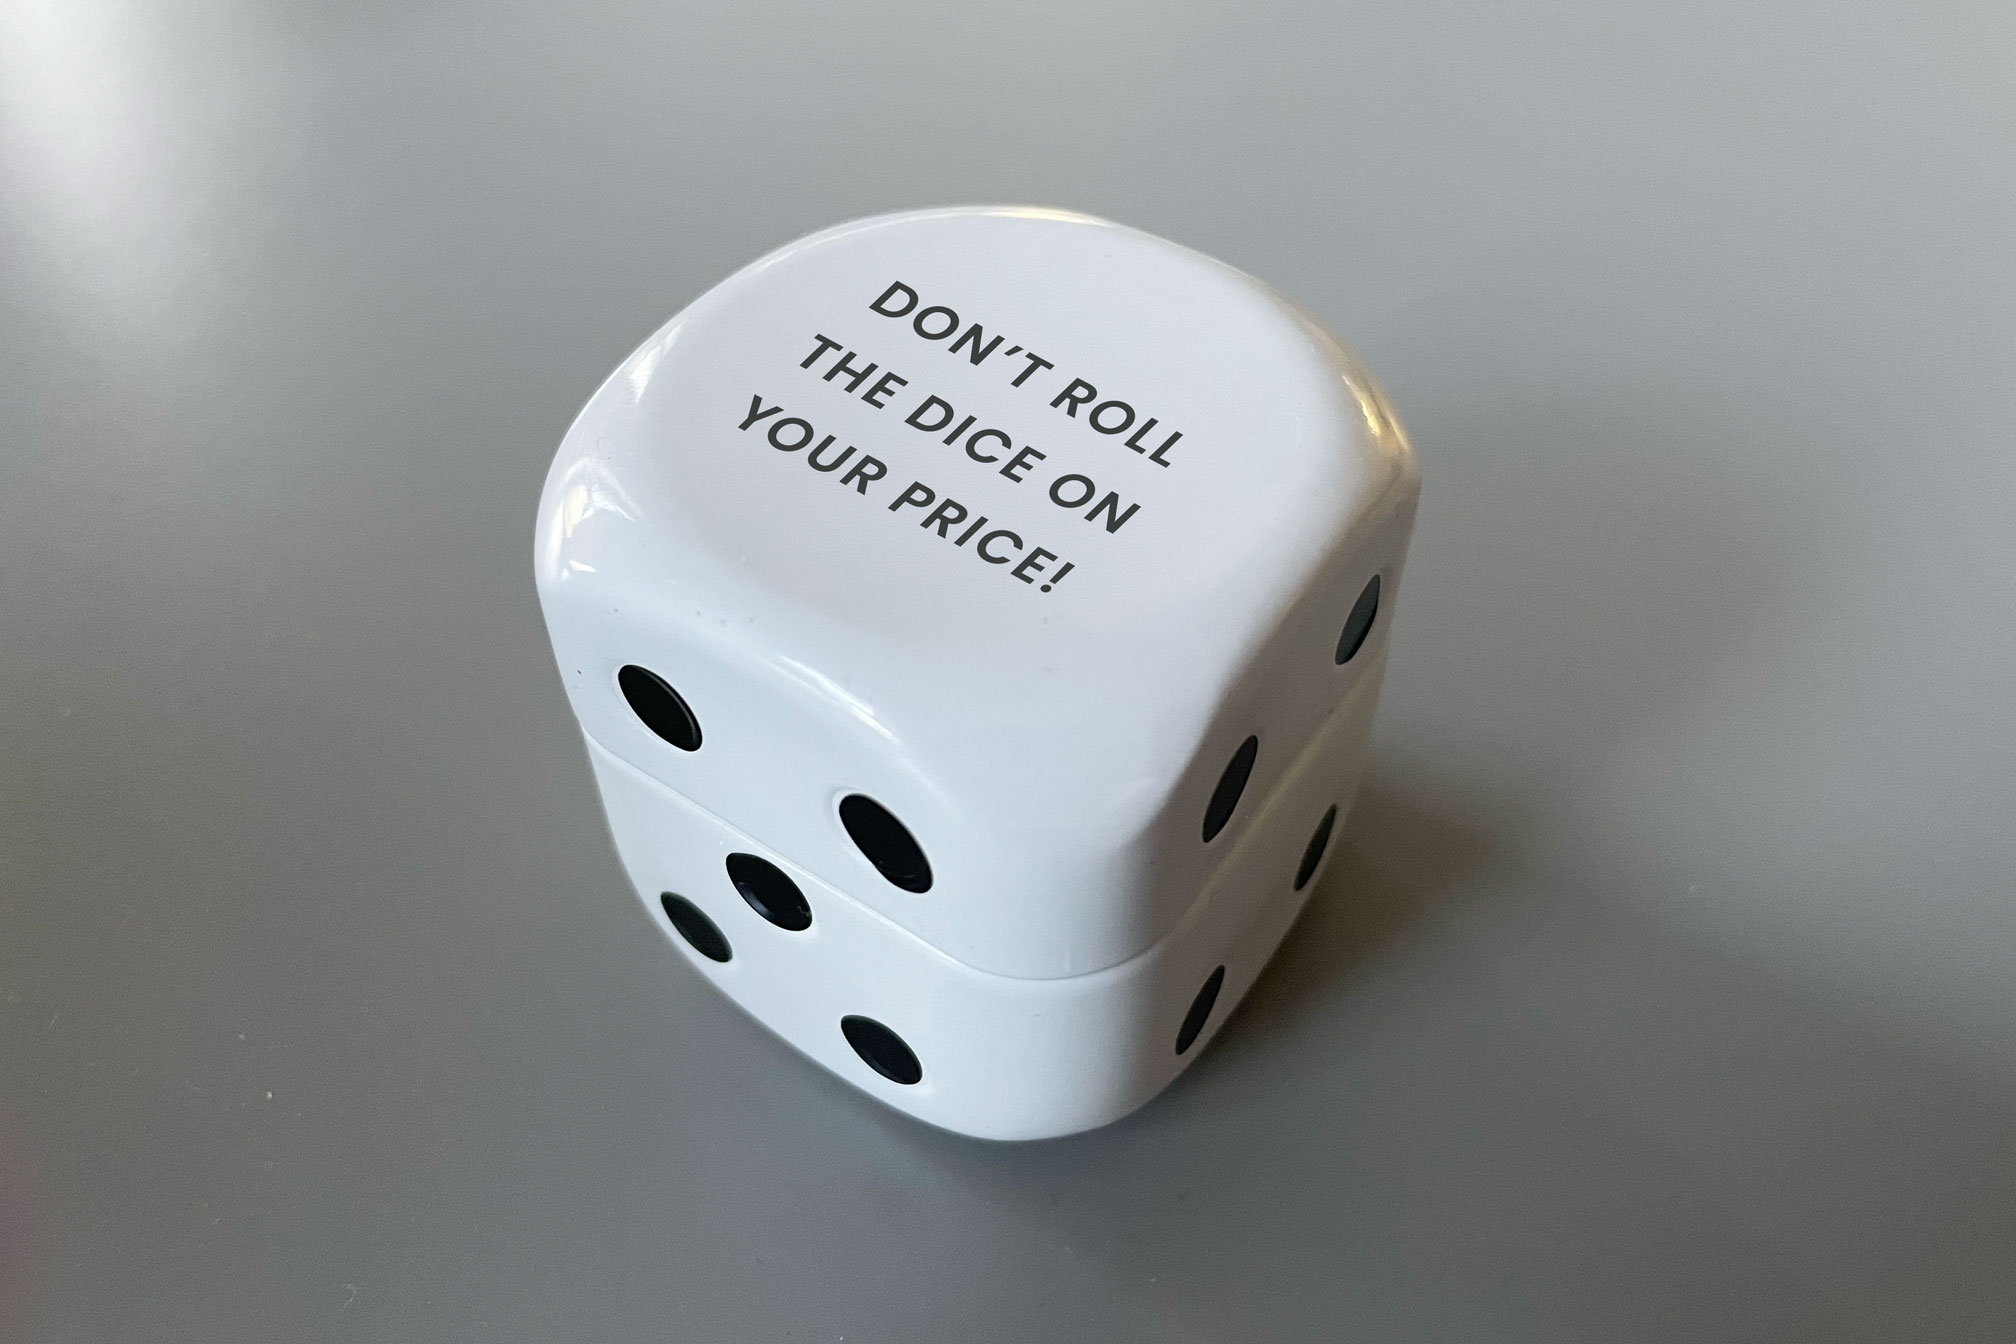 Image of dice that says "Don't roll the dice on your price"